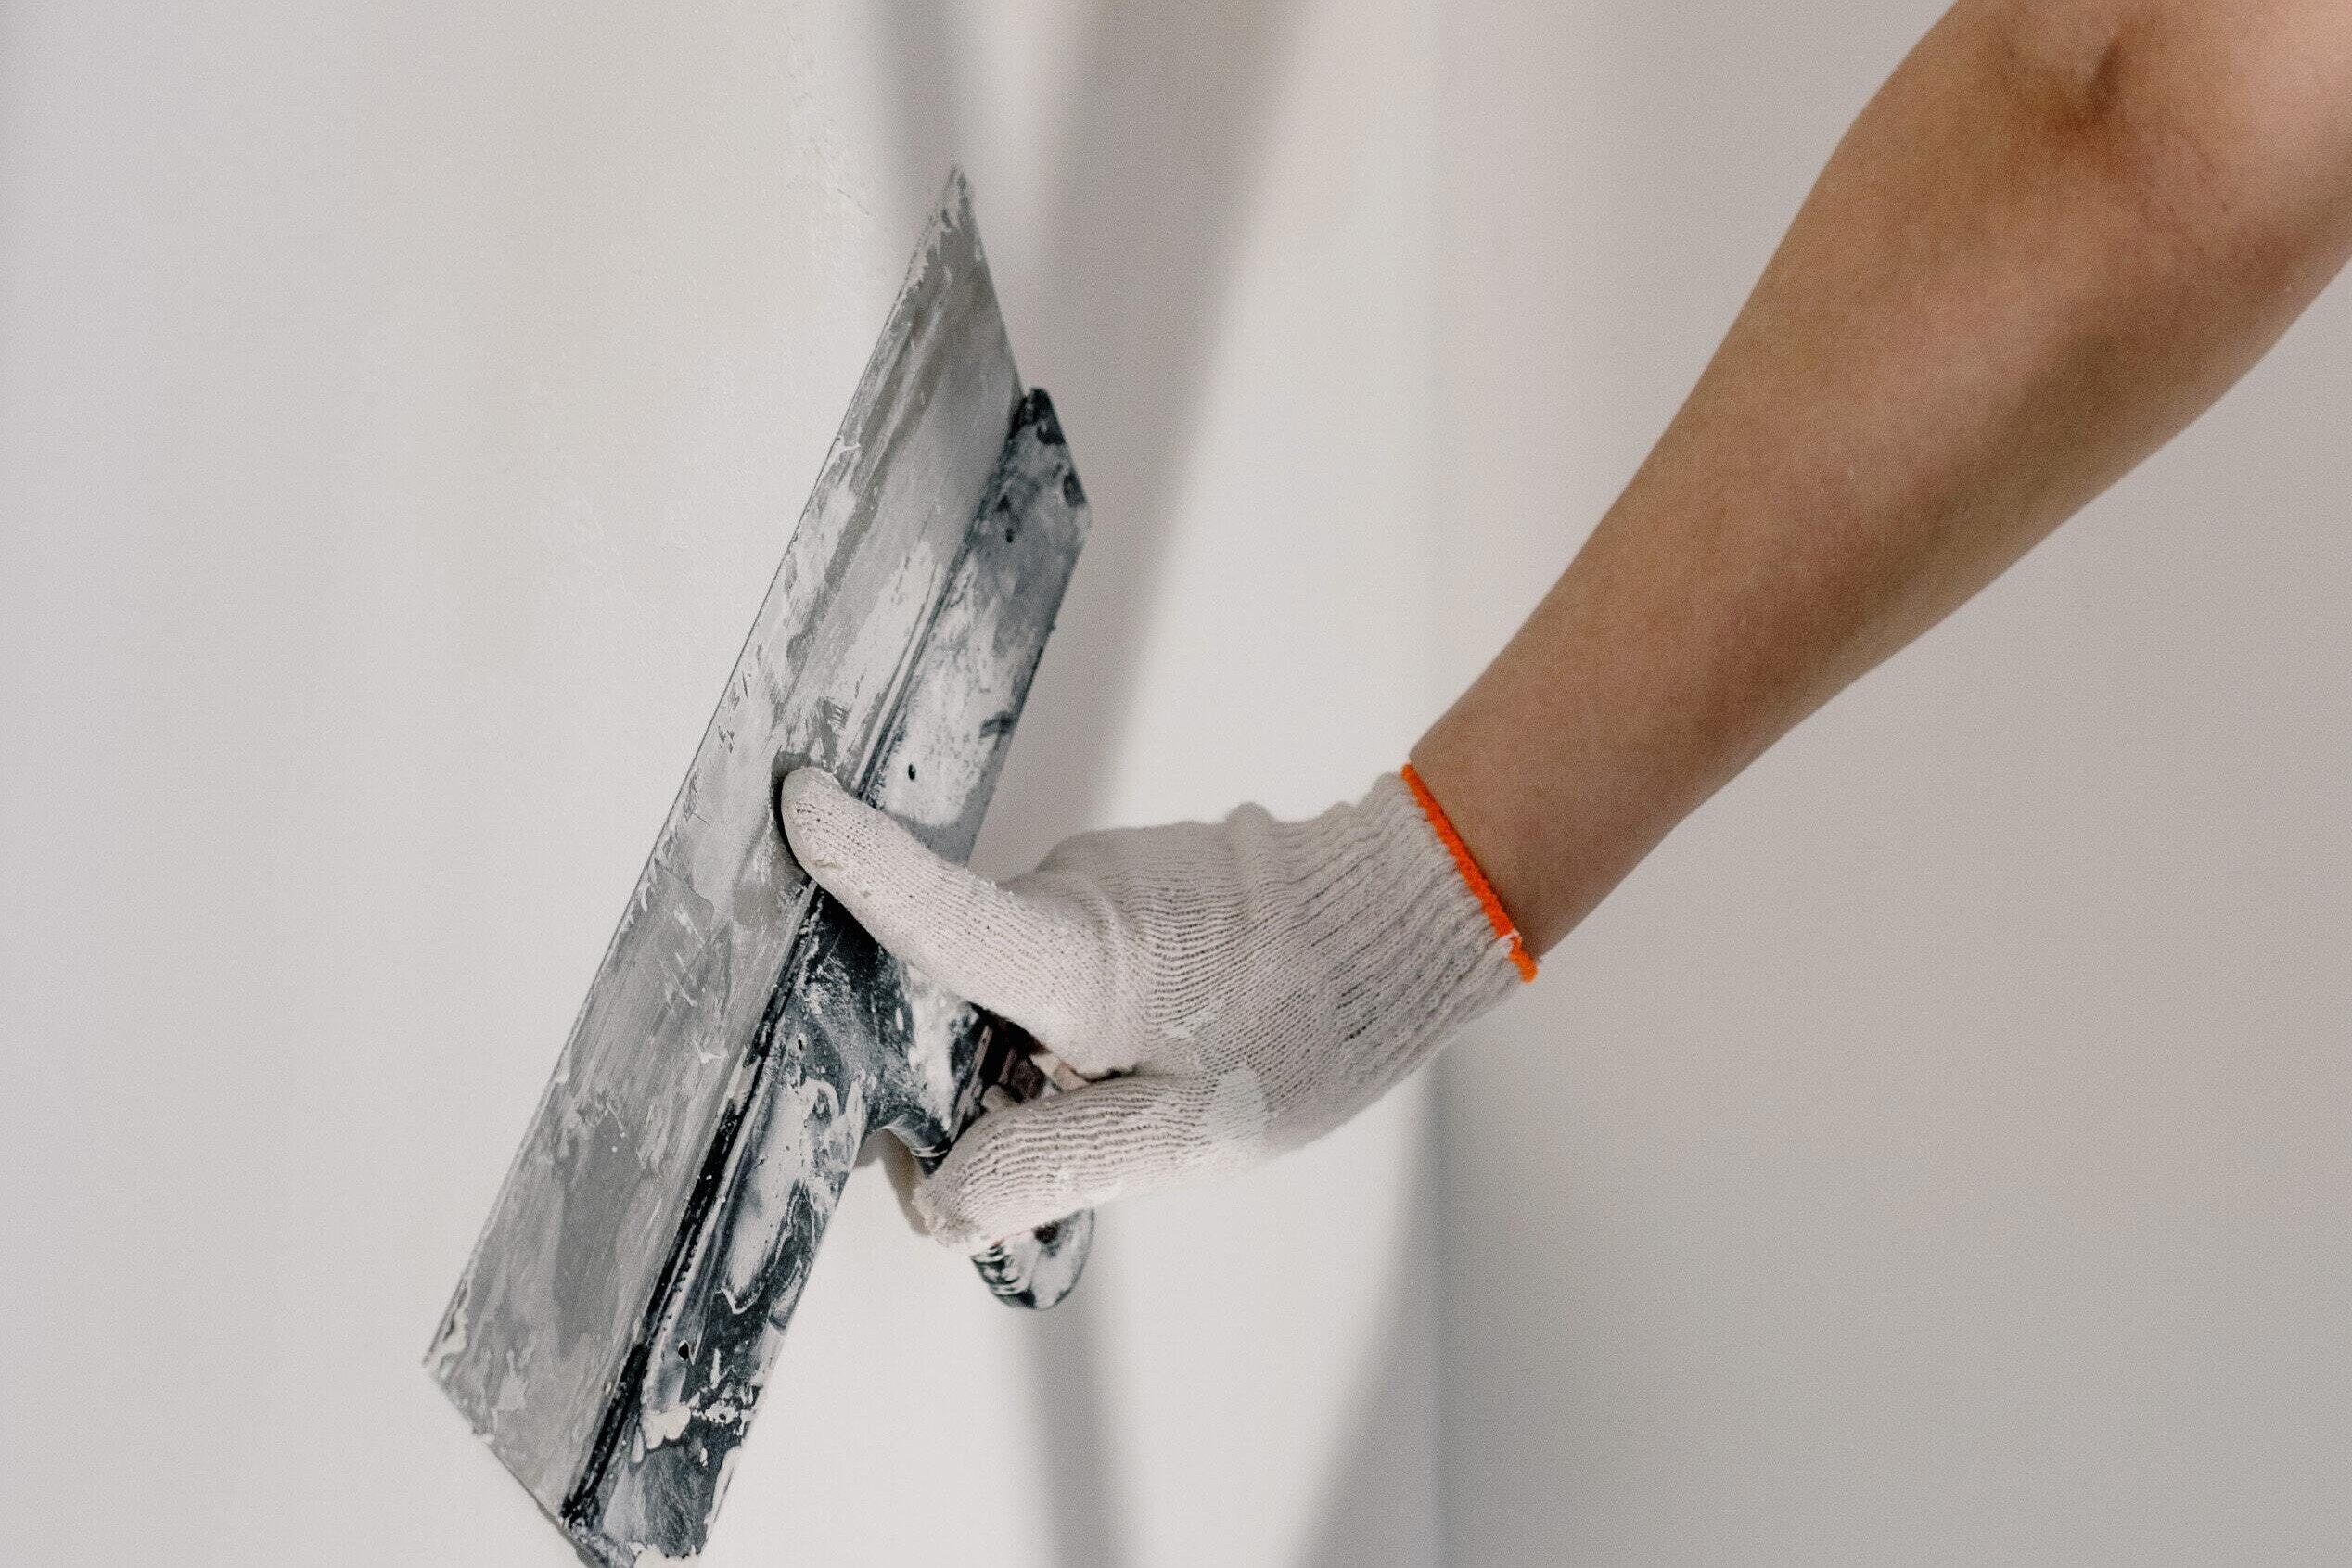 dry wall services